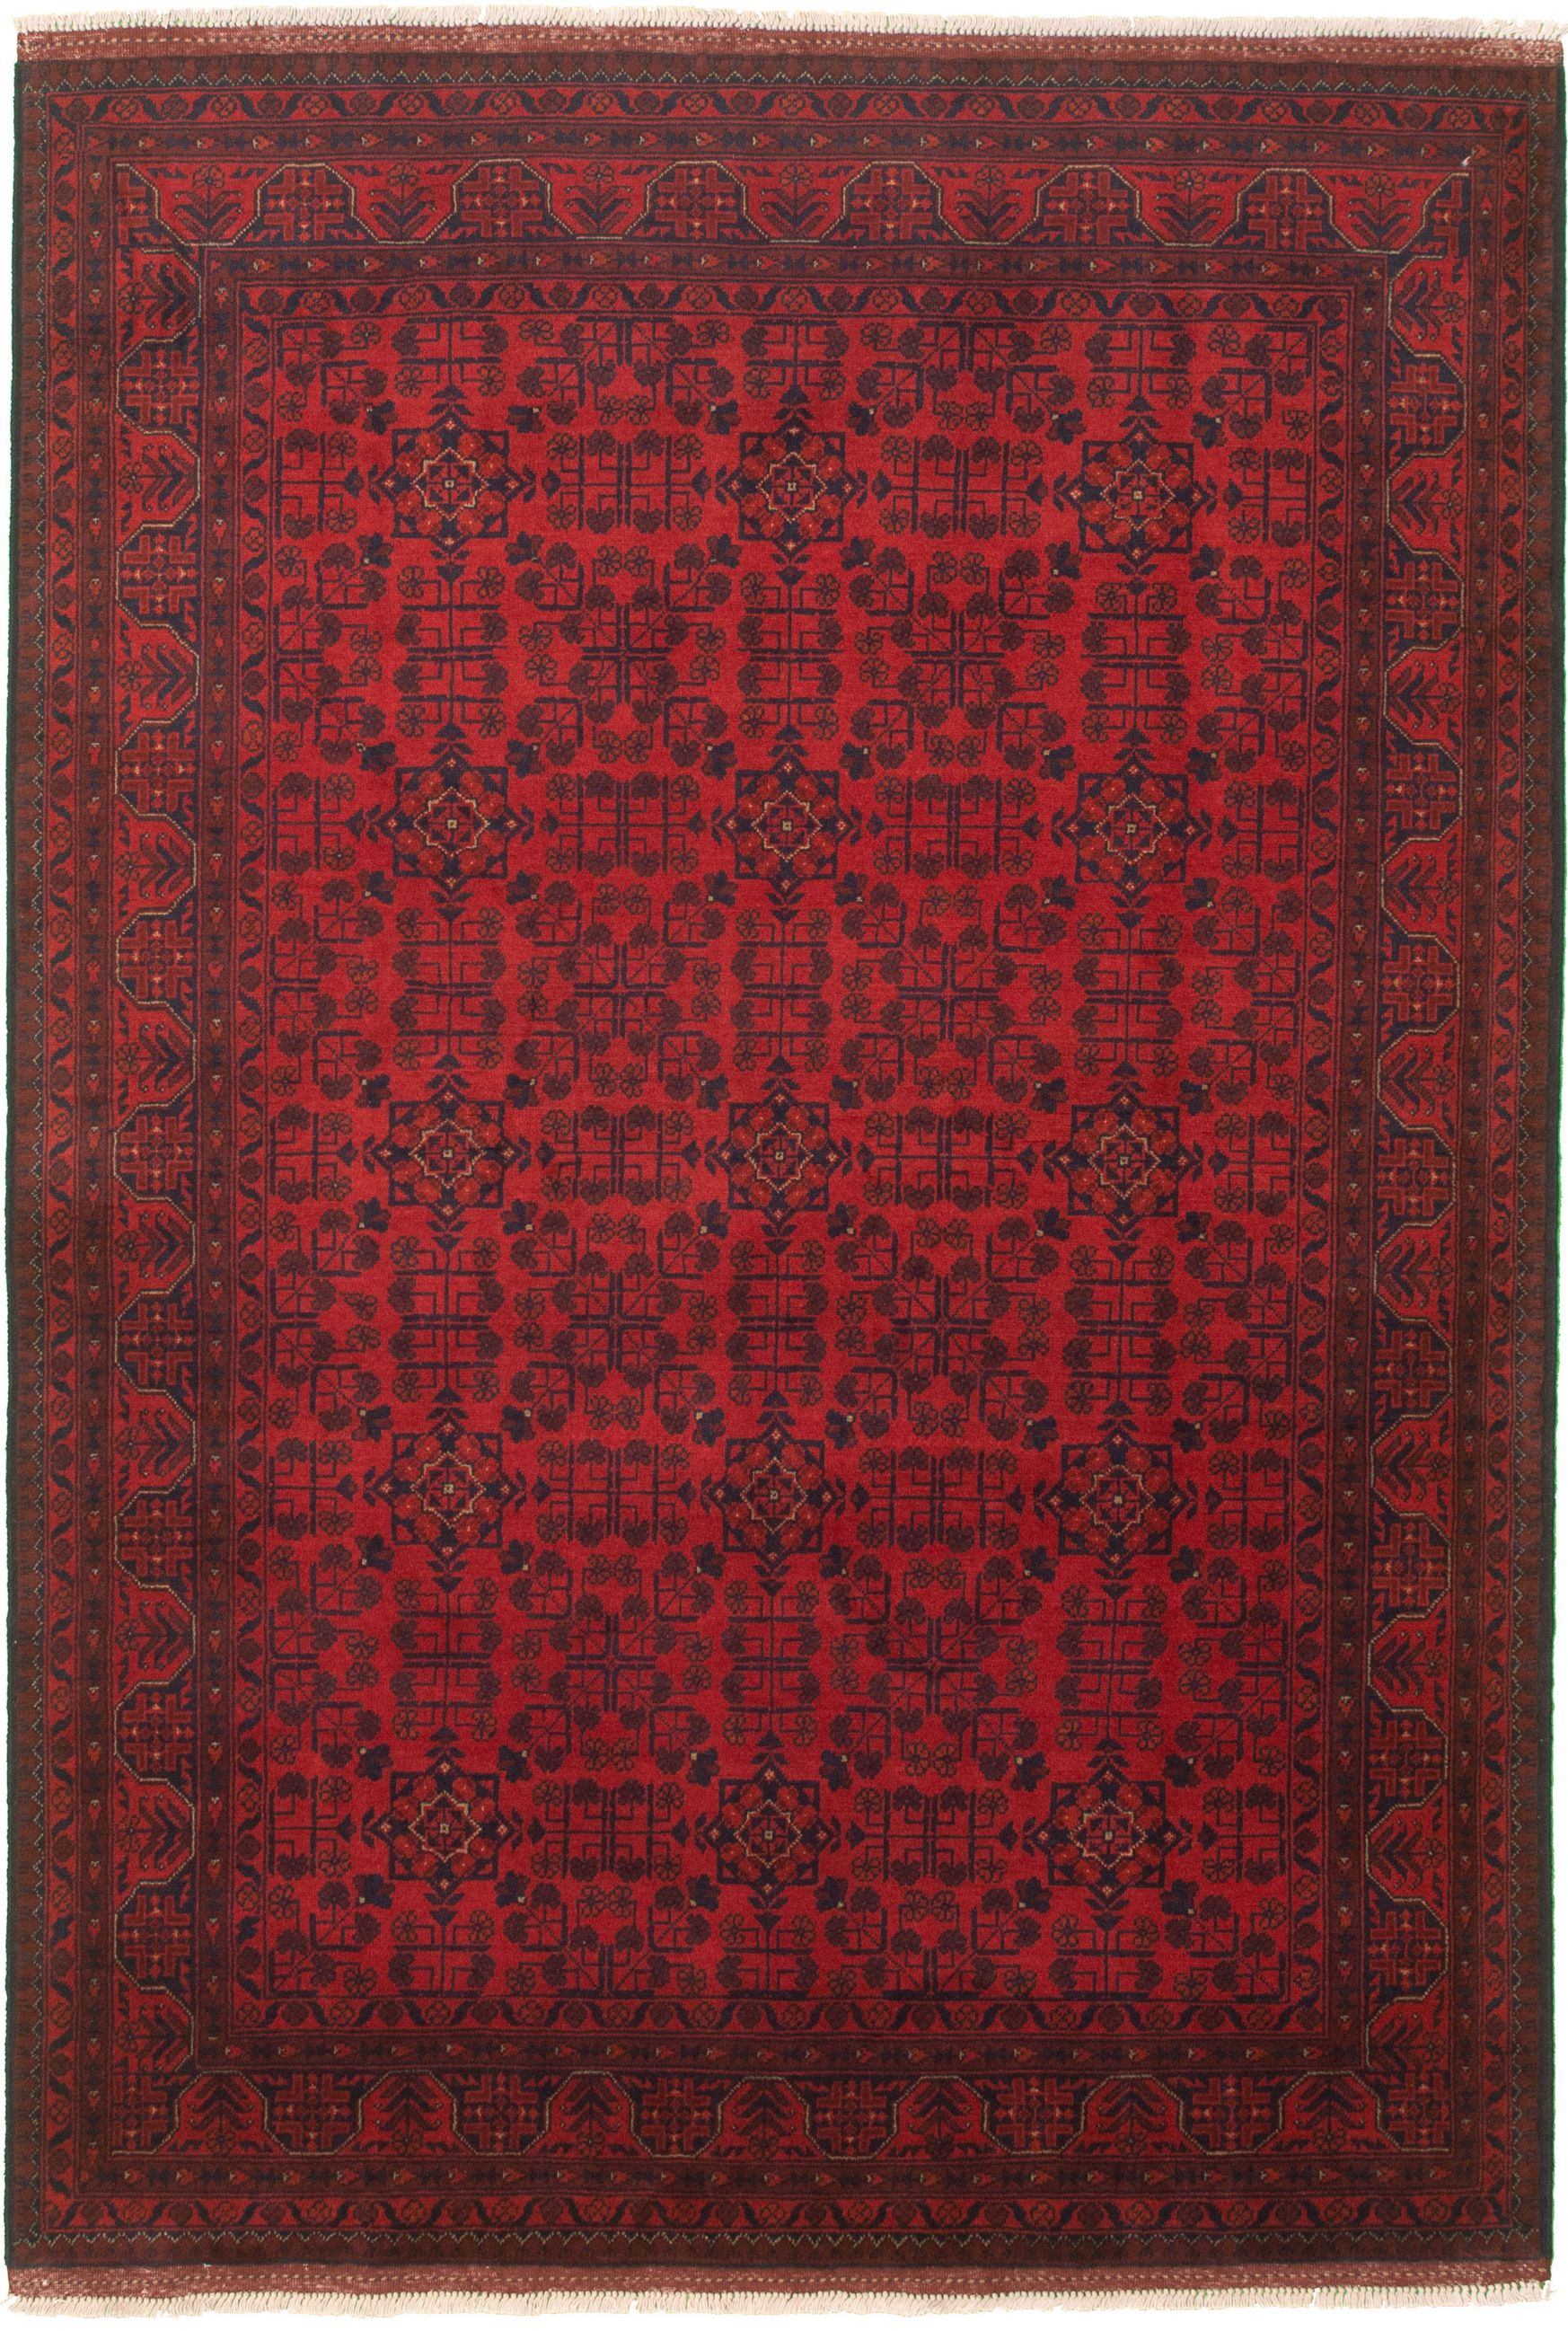 Hand-knotted Finest Khal Mohammadi Red Wool Rug 5'7" x 8'1"  Size: 5'7" x 8'1"  